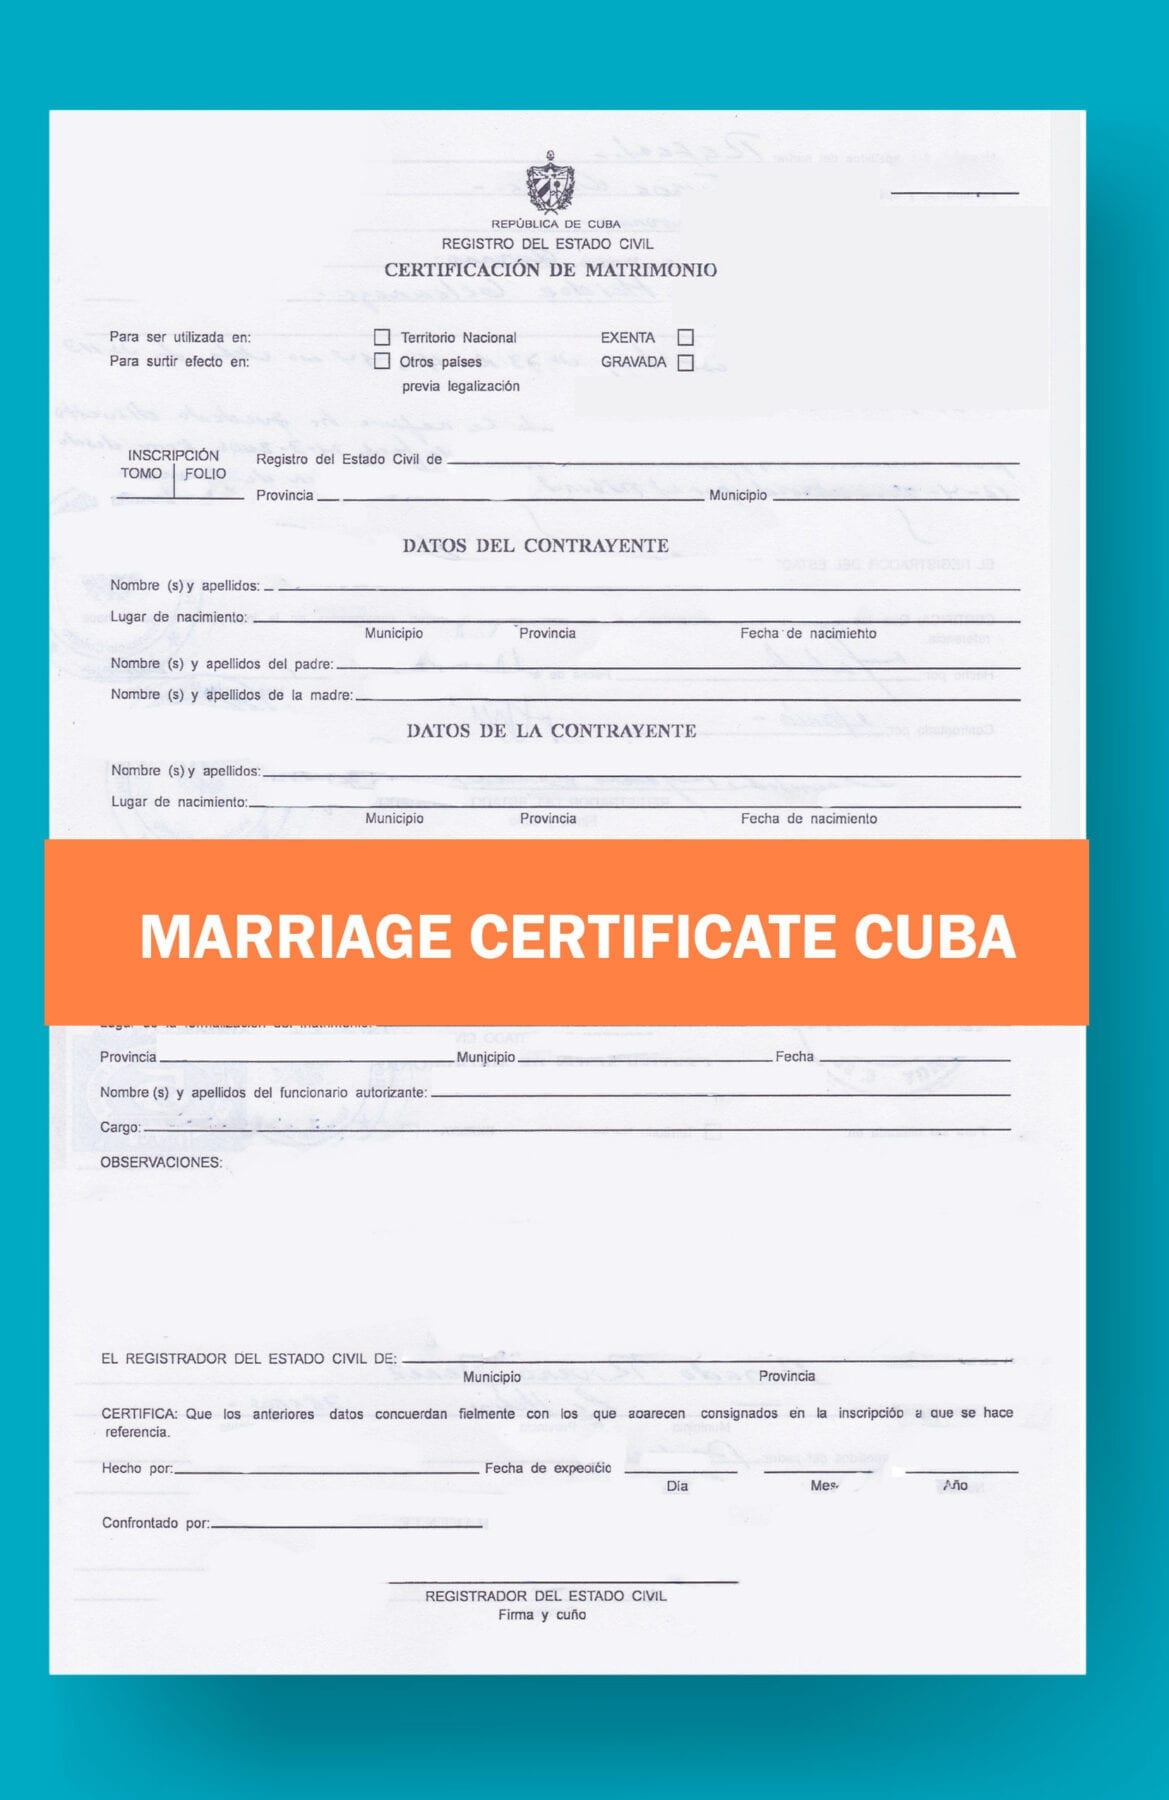 Marriage Certificate Translation $10 pp delivery same day no extra  With Marriage Certificate Translation Template